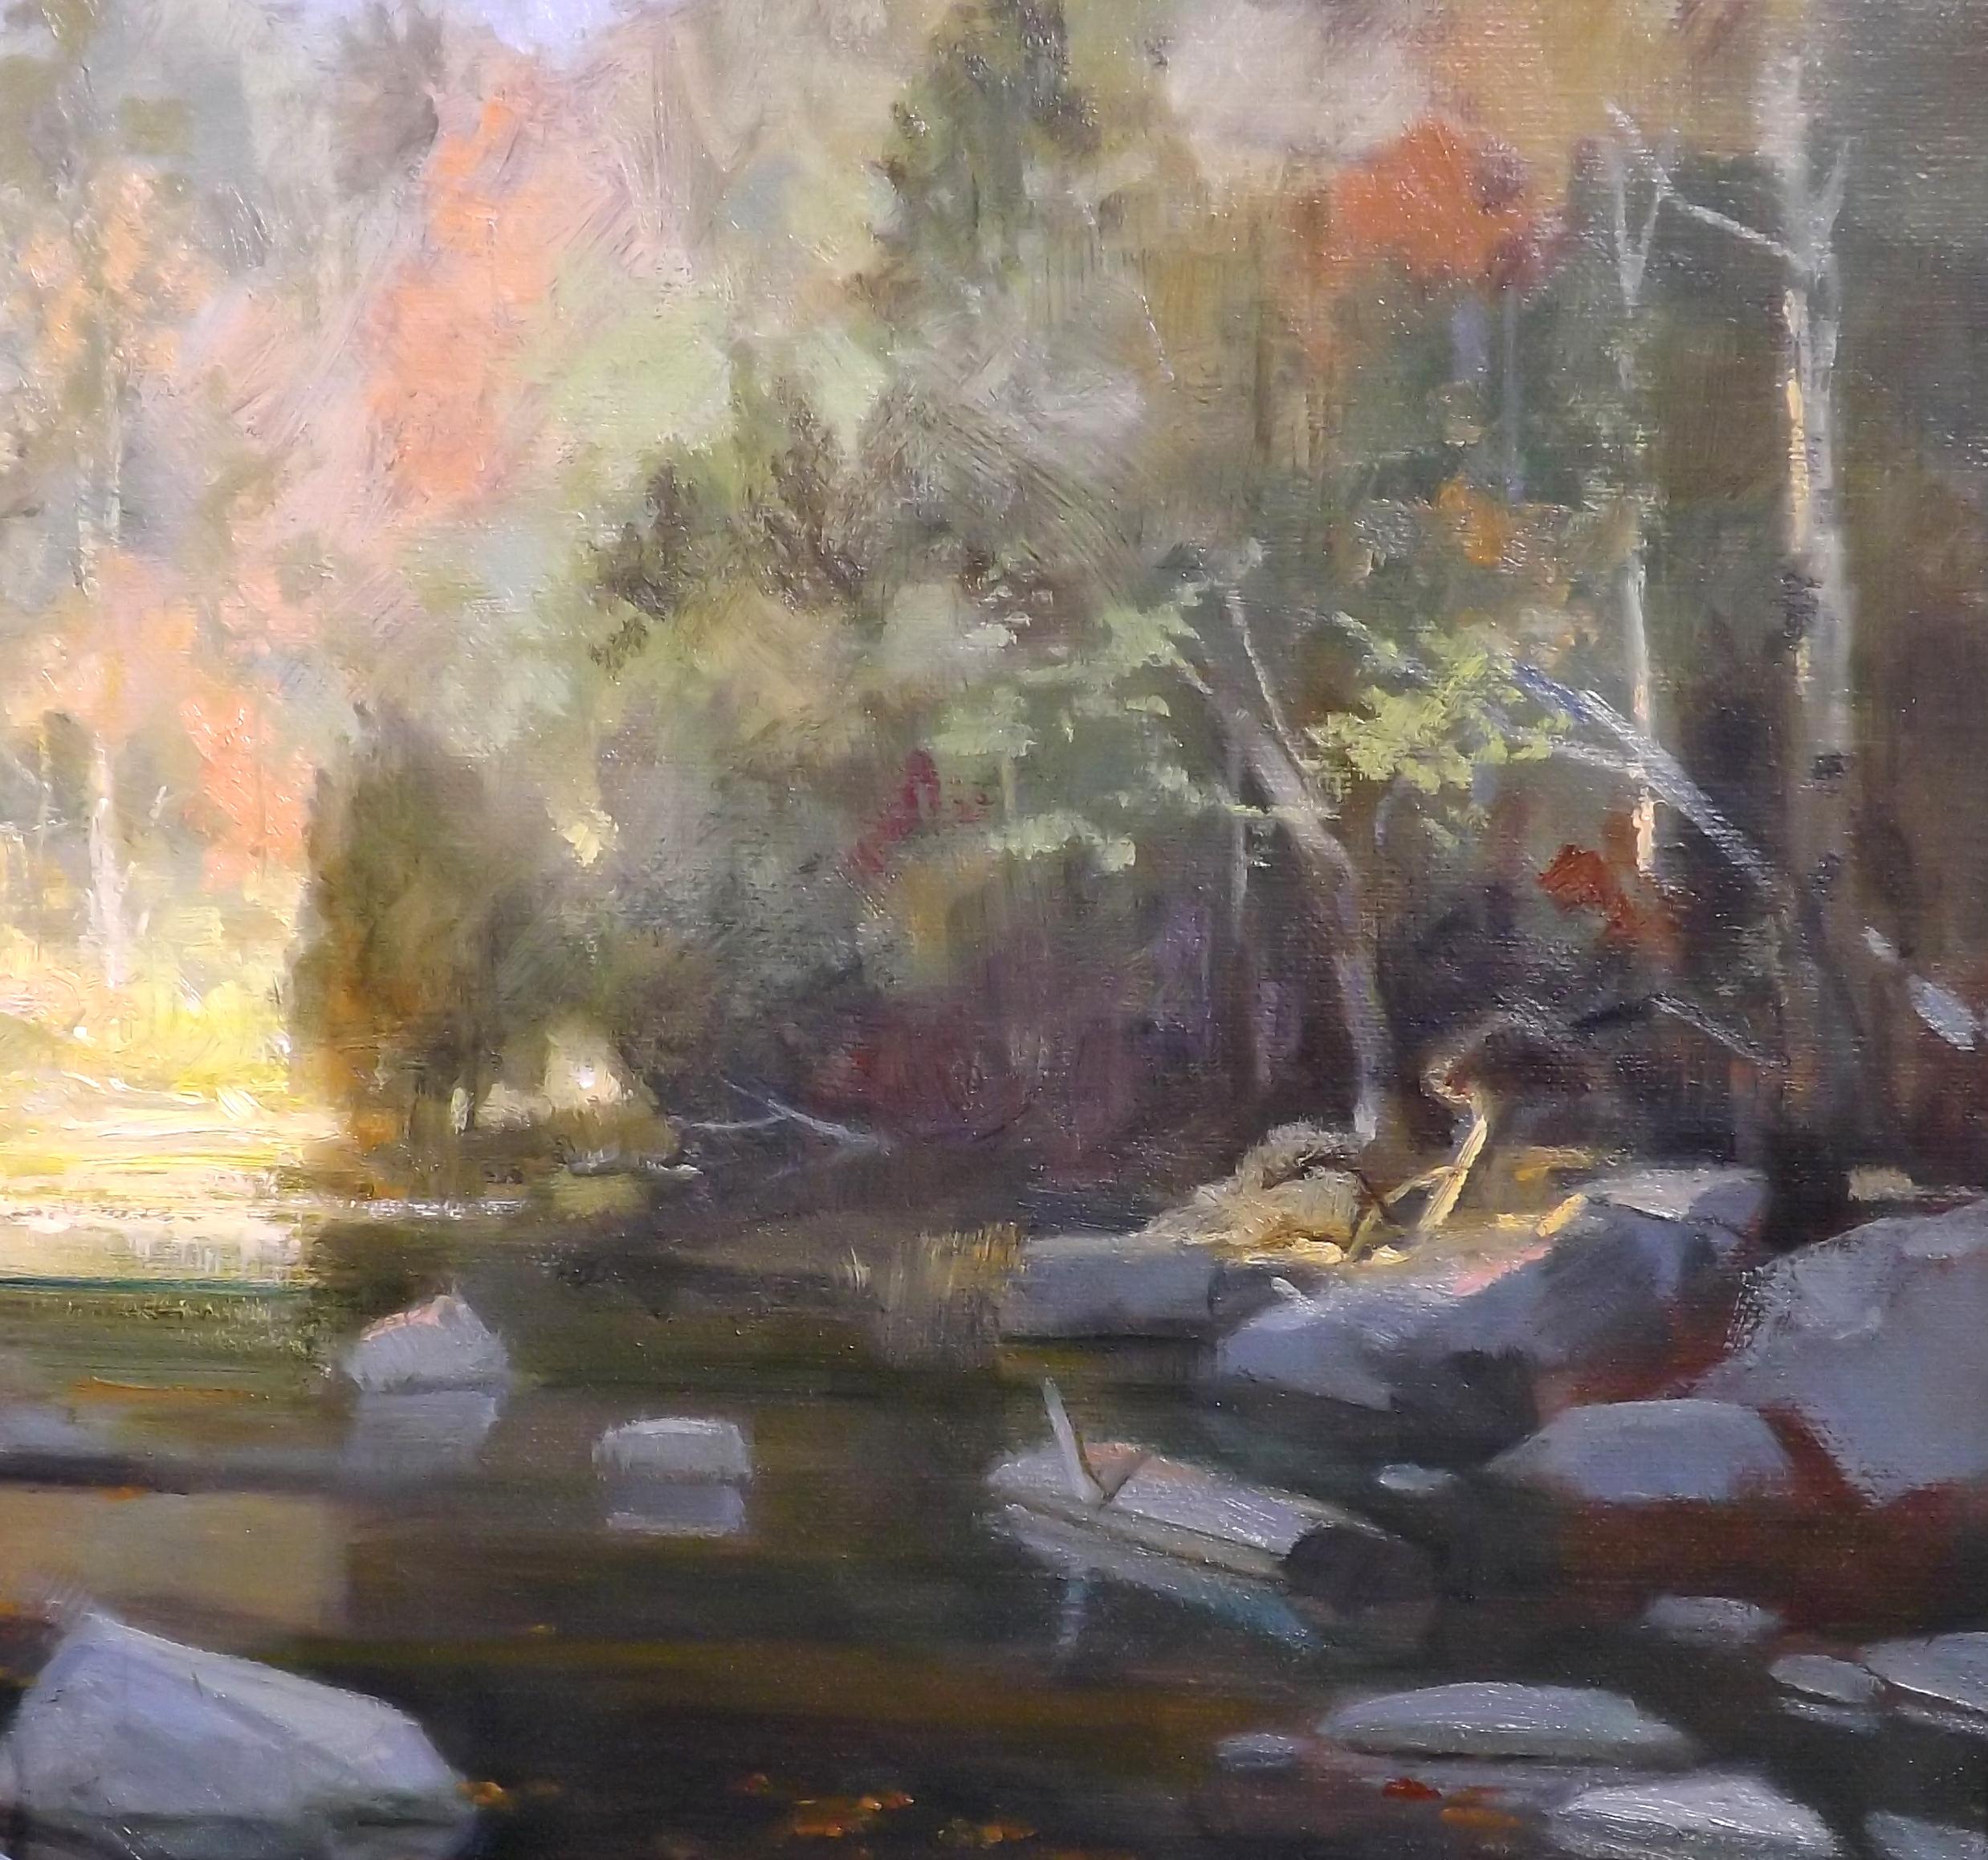 painter of a stream by a wood